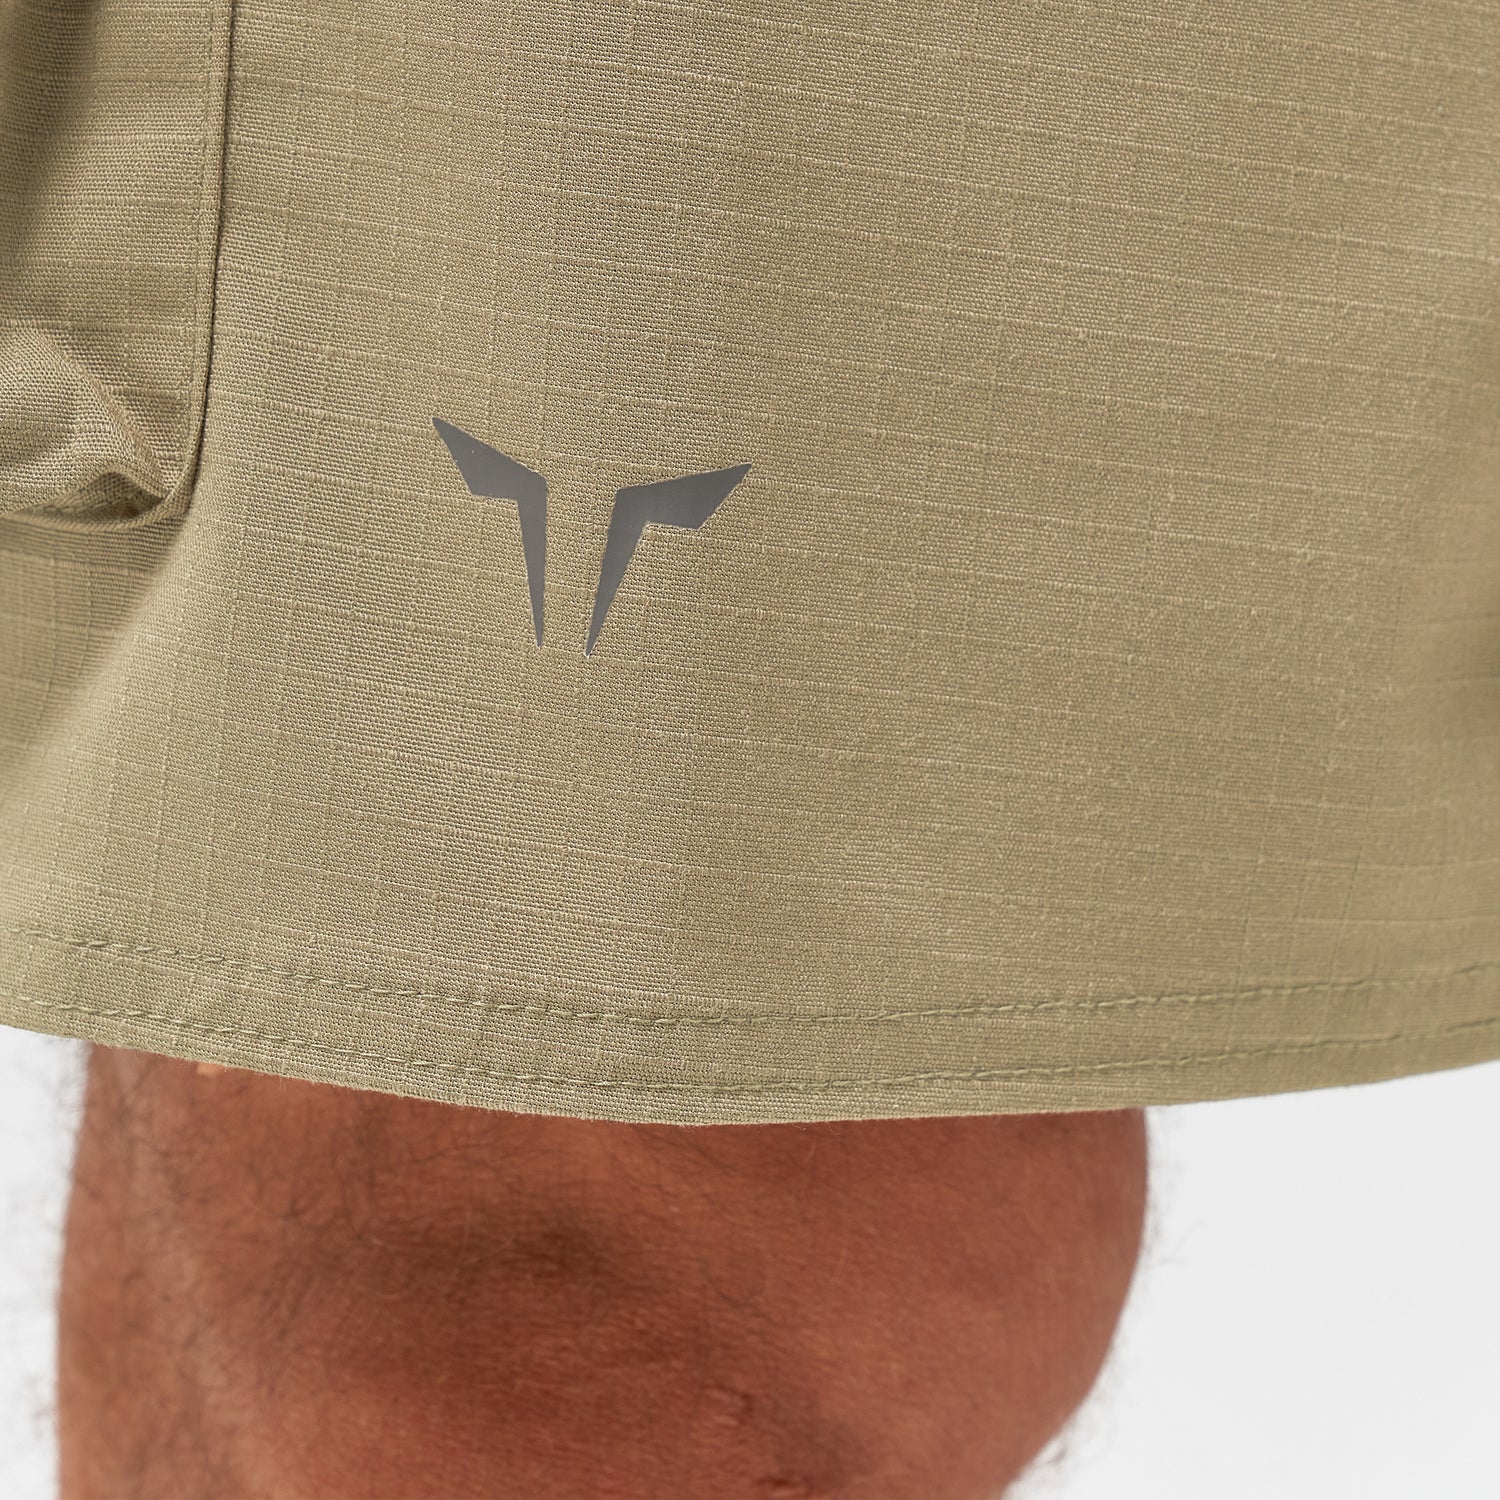 squatwolf-gym-wear-code-2-in-1-cargo-shorts-green-workout-shorts-for-men